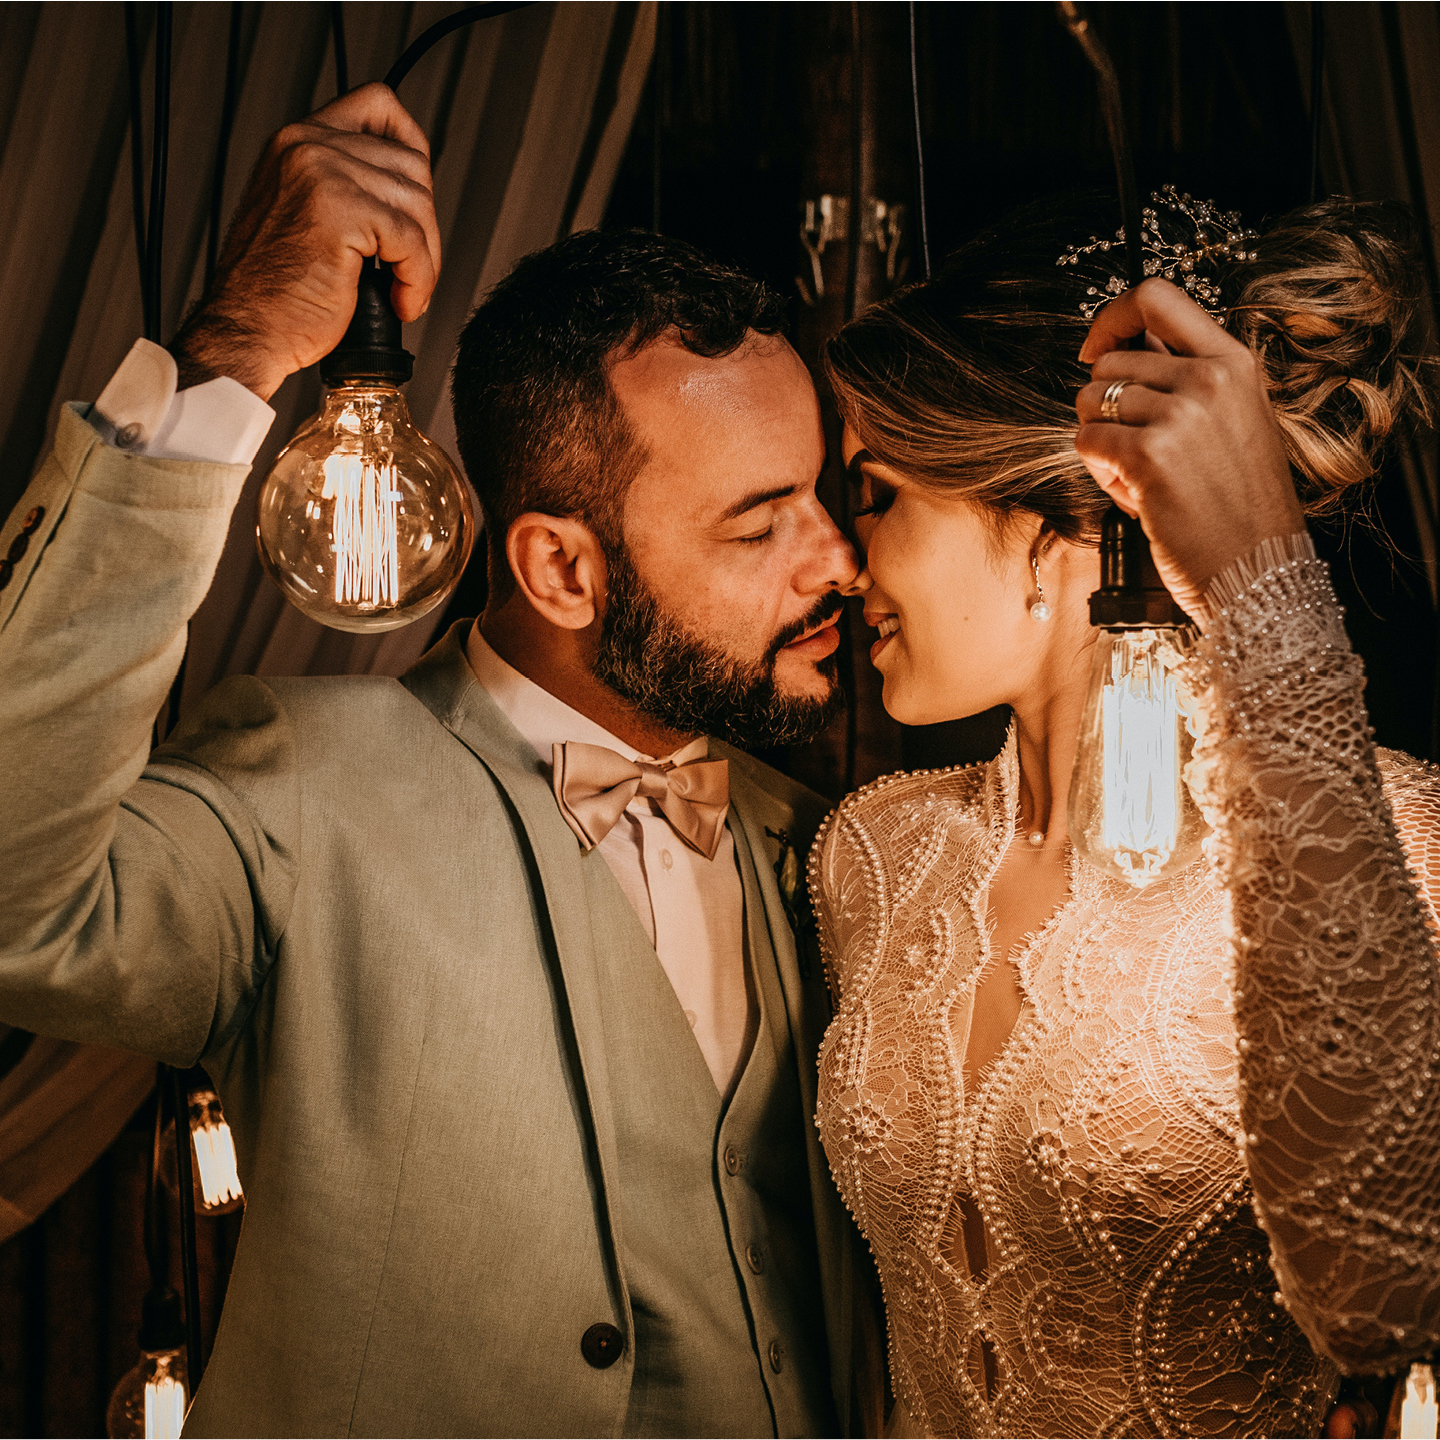 Wedding lighting what you need to know, wedding lights tips and tricks